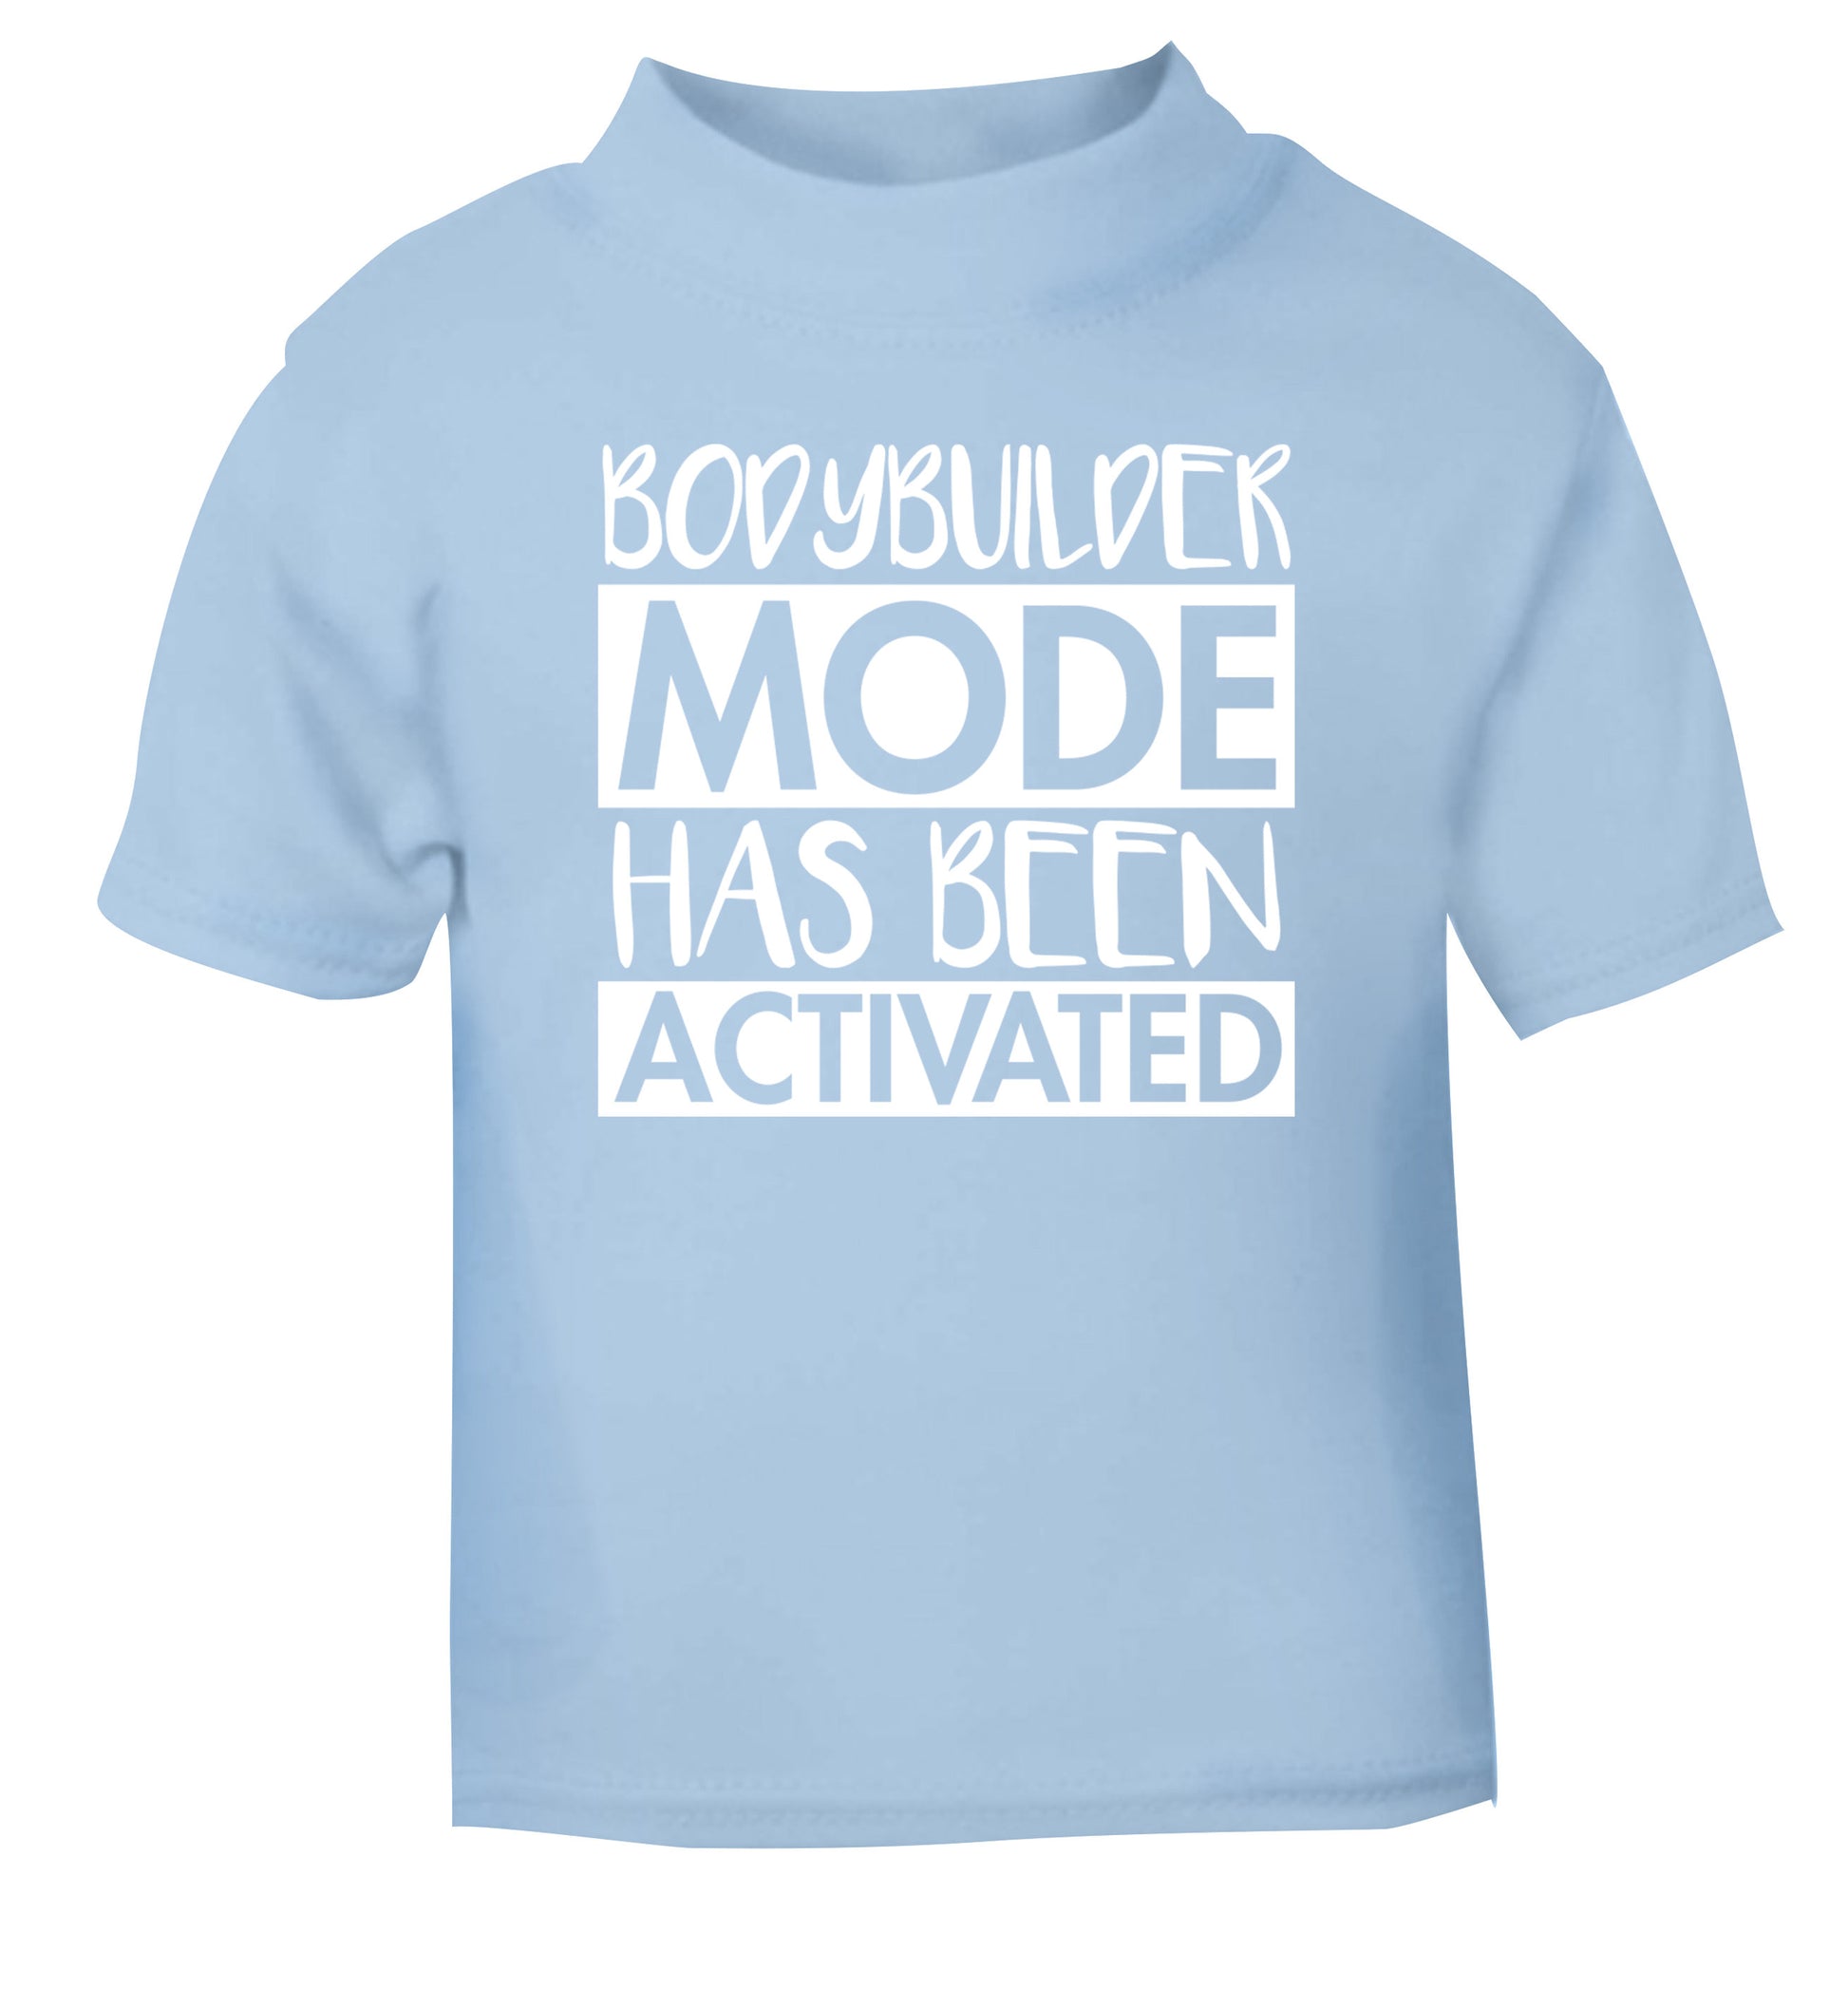 Bodybuilder mode activated light blue Baby Toddler Tshirt 2 Years